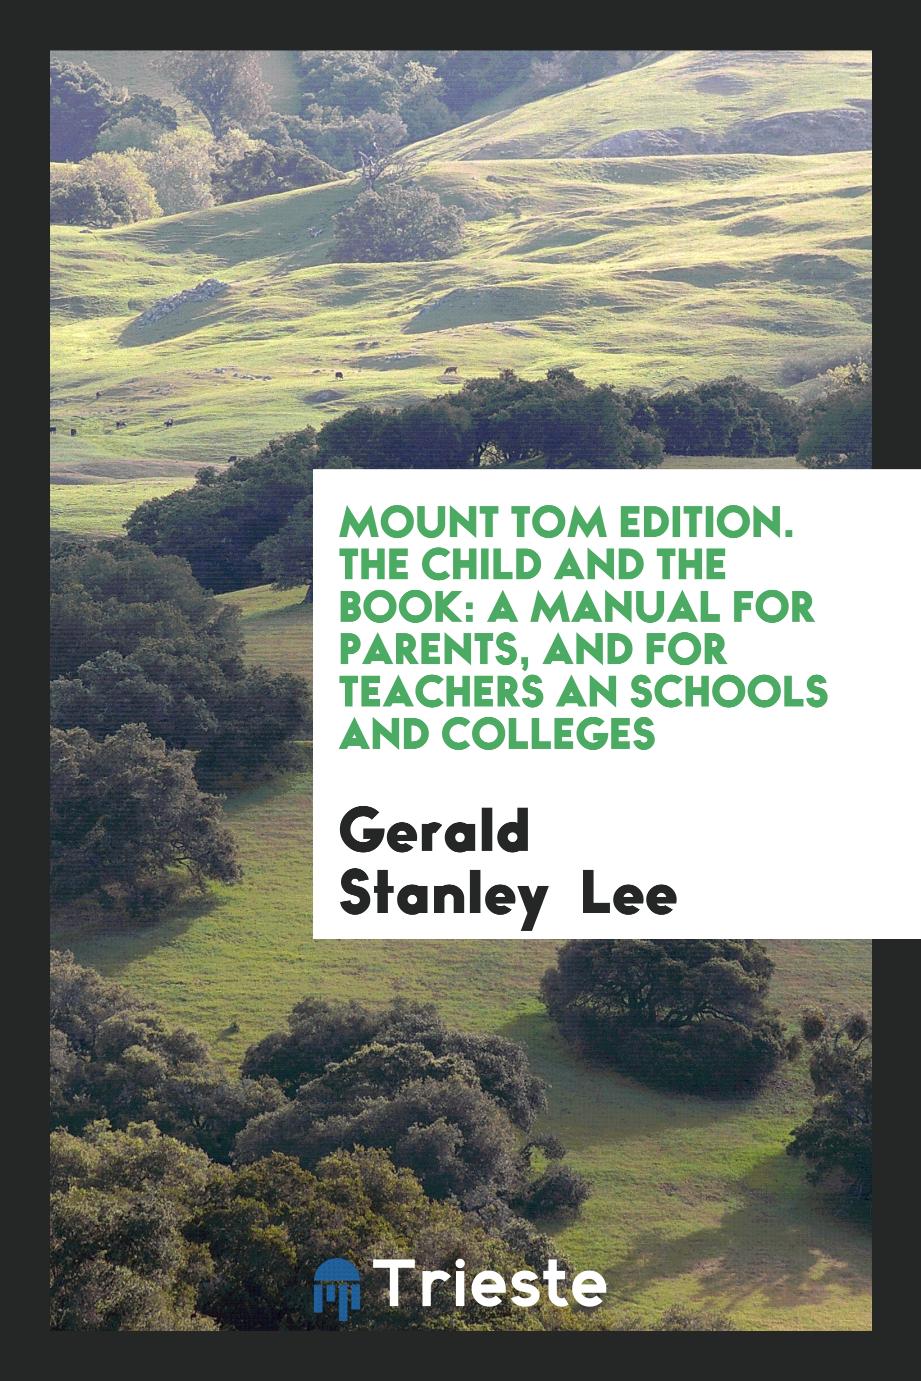 Mount Tom Edition. The Child and the Book: A Manual for Parents, and for Teachers an Schools and Colleges